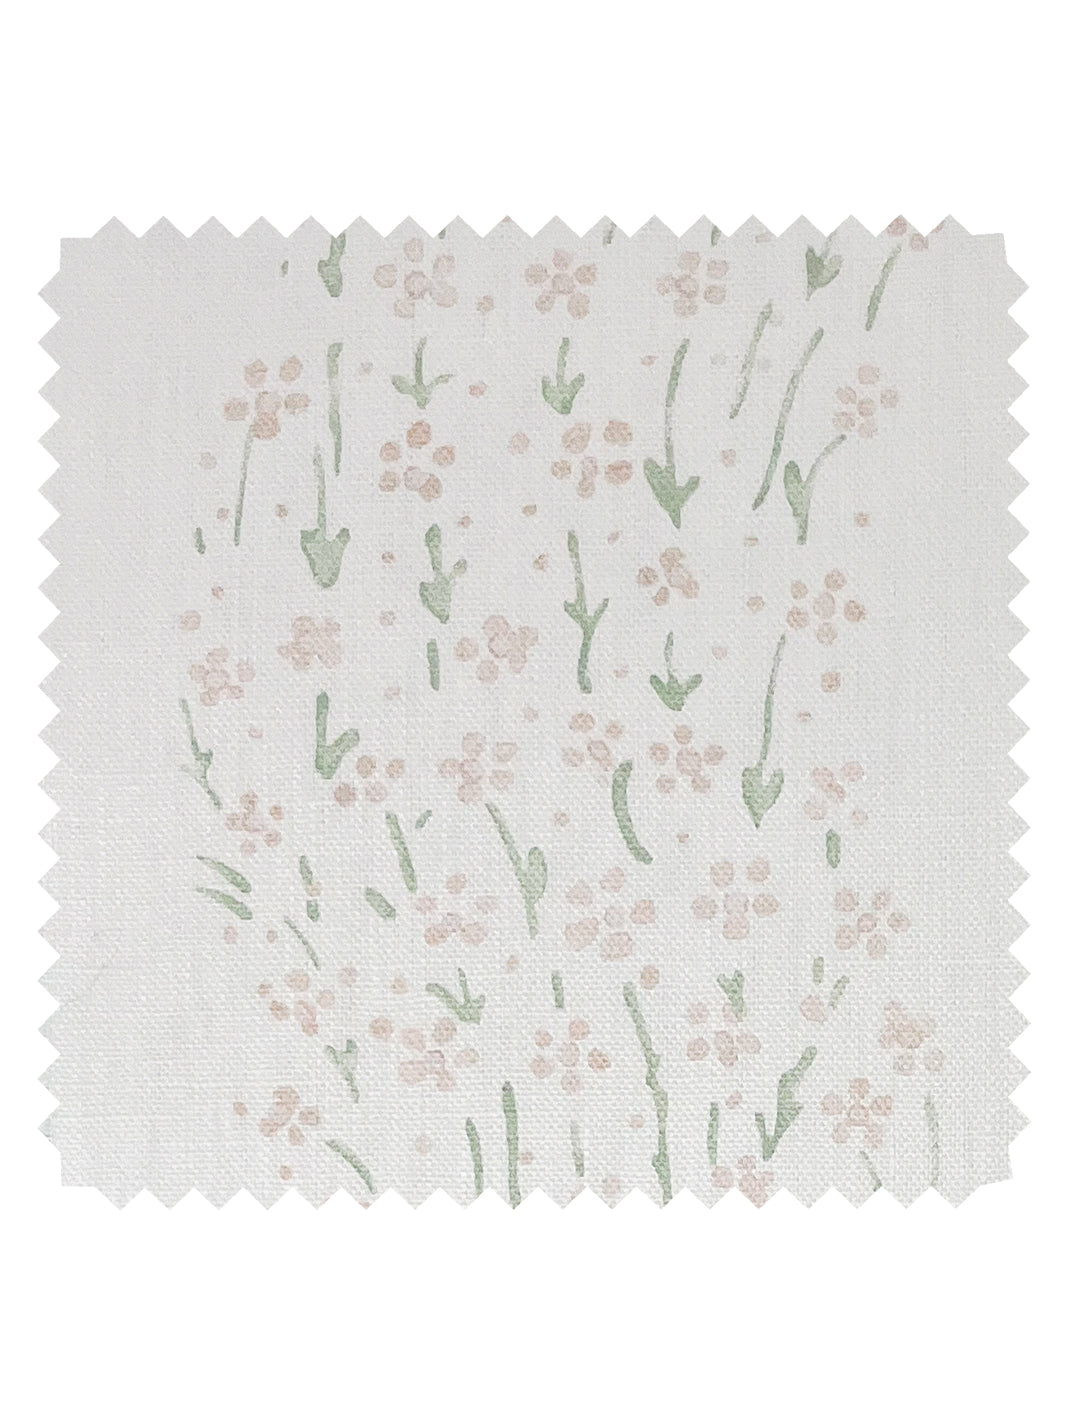 'Hillhouse Floral Ditsy Wave' Linen Fabric by Nathan Turner - Pink Green